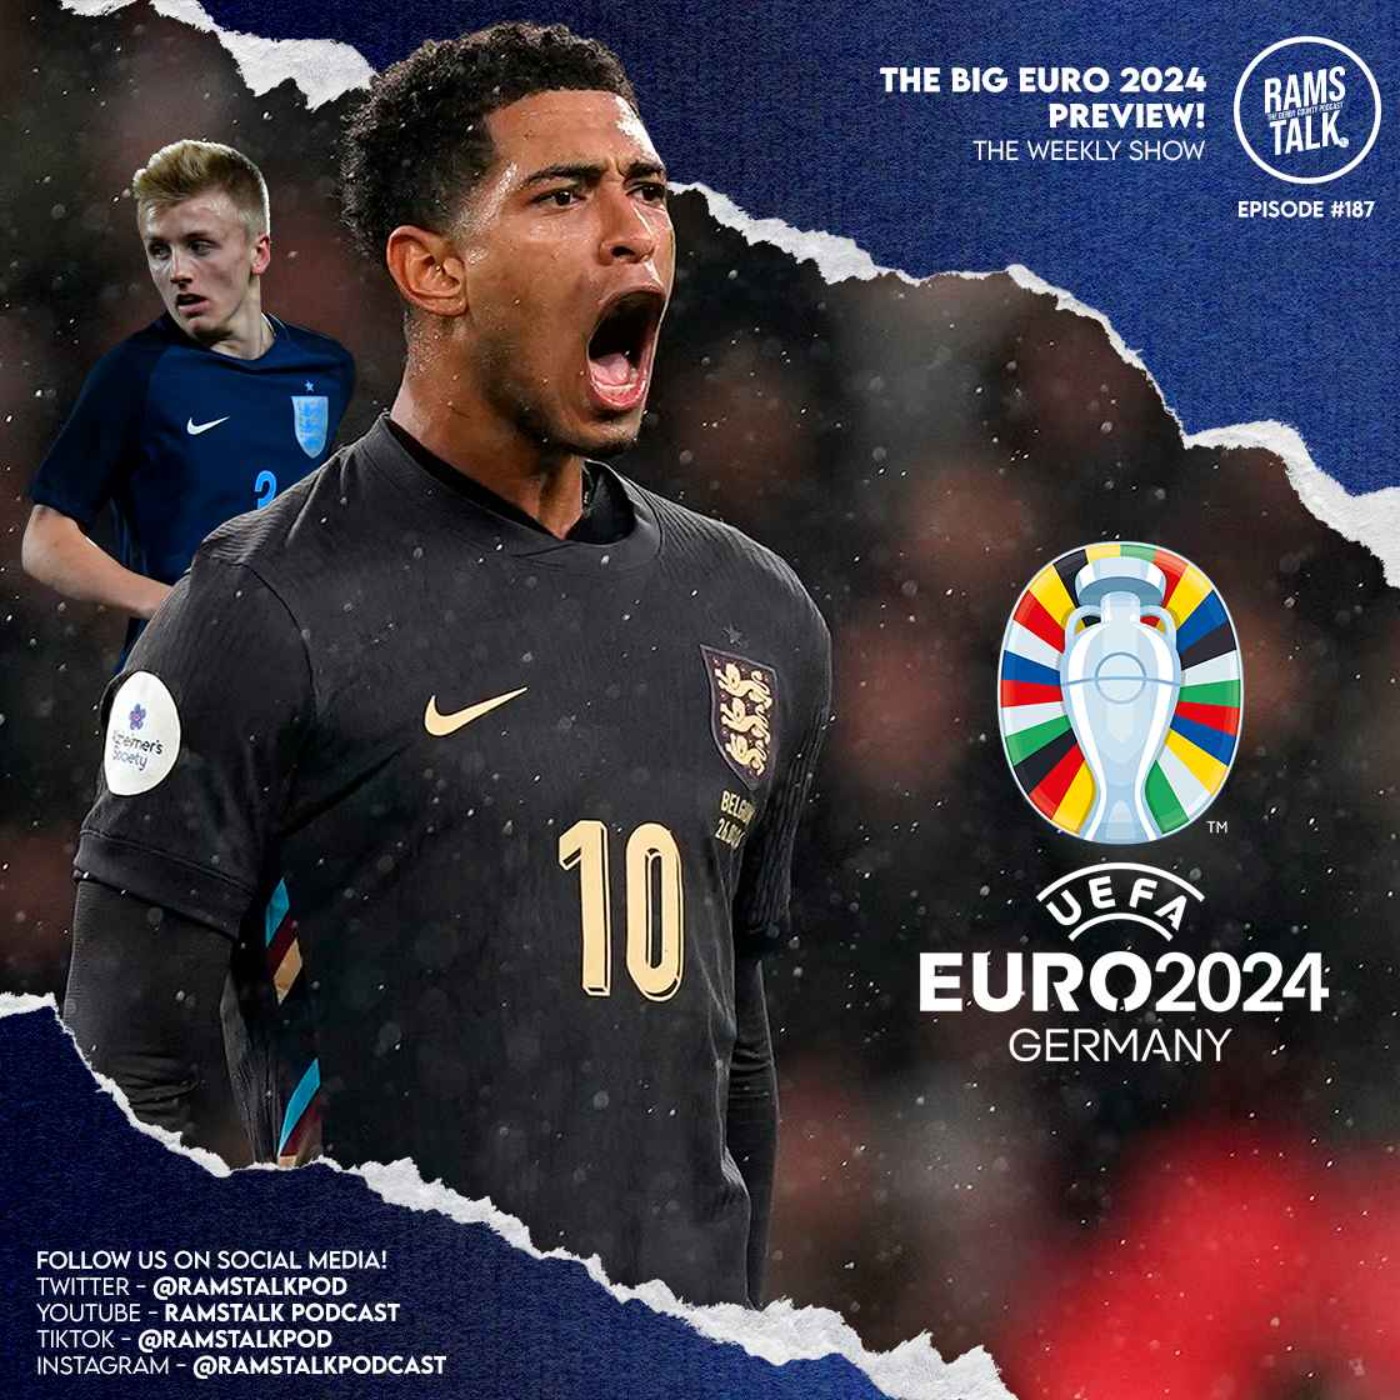 #187 The Big Euro 2024 Preview!